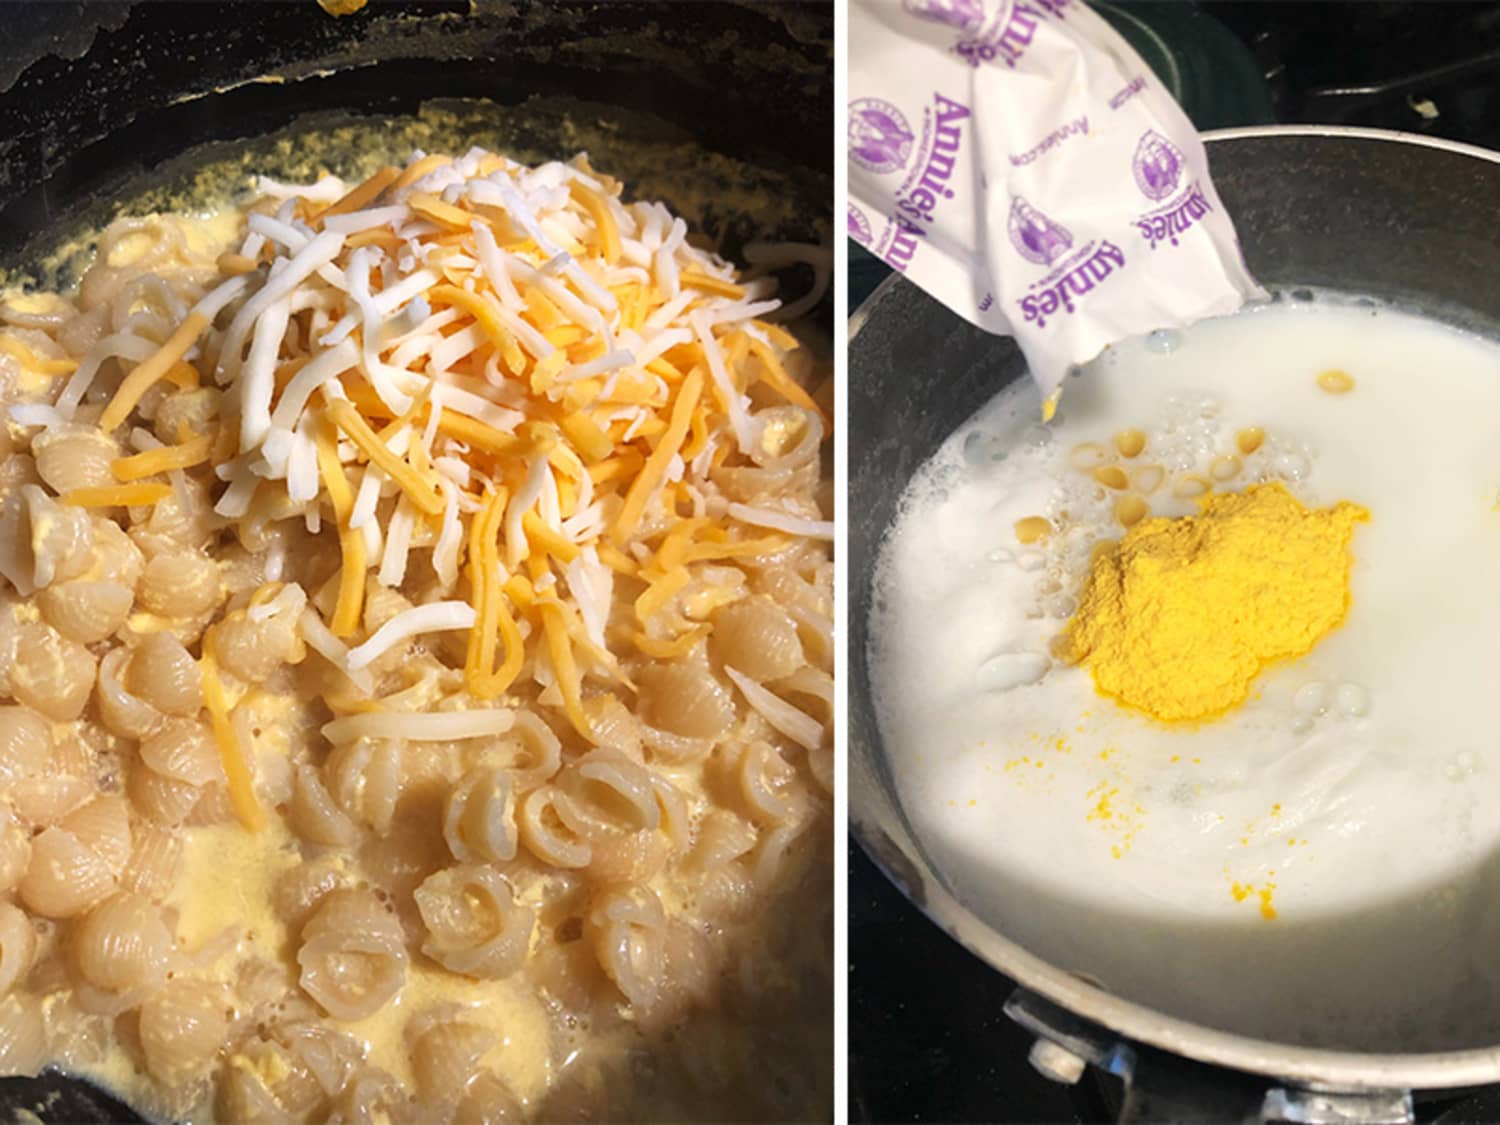  Easy Ways to Make Boxed Mac & Cheese Taste Like You Made It from Scratch